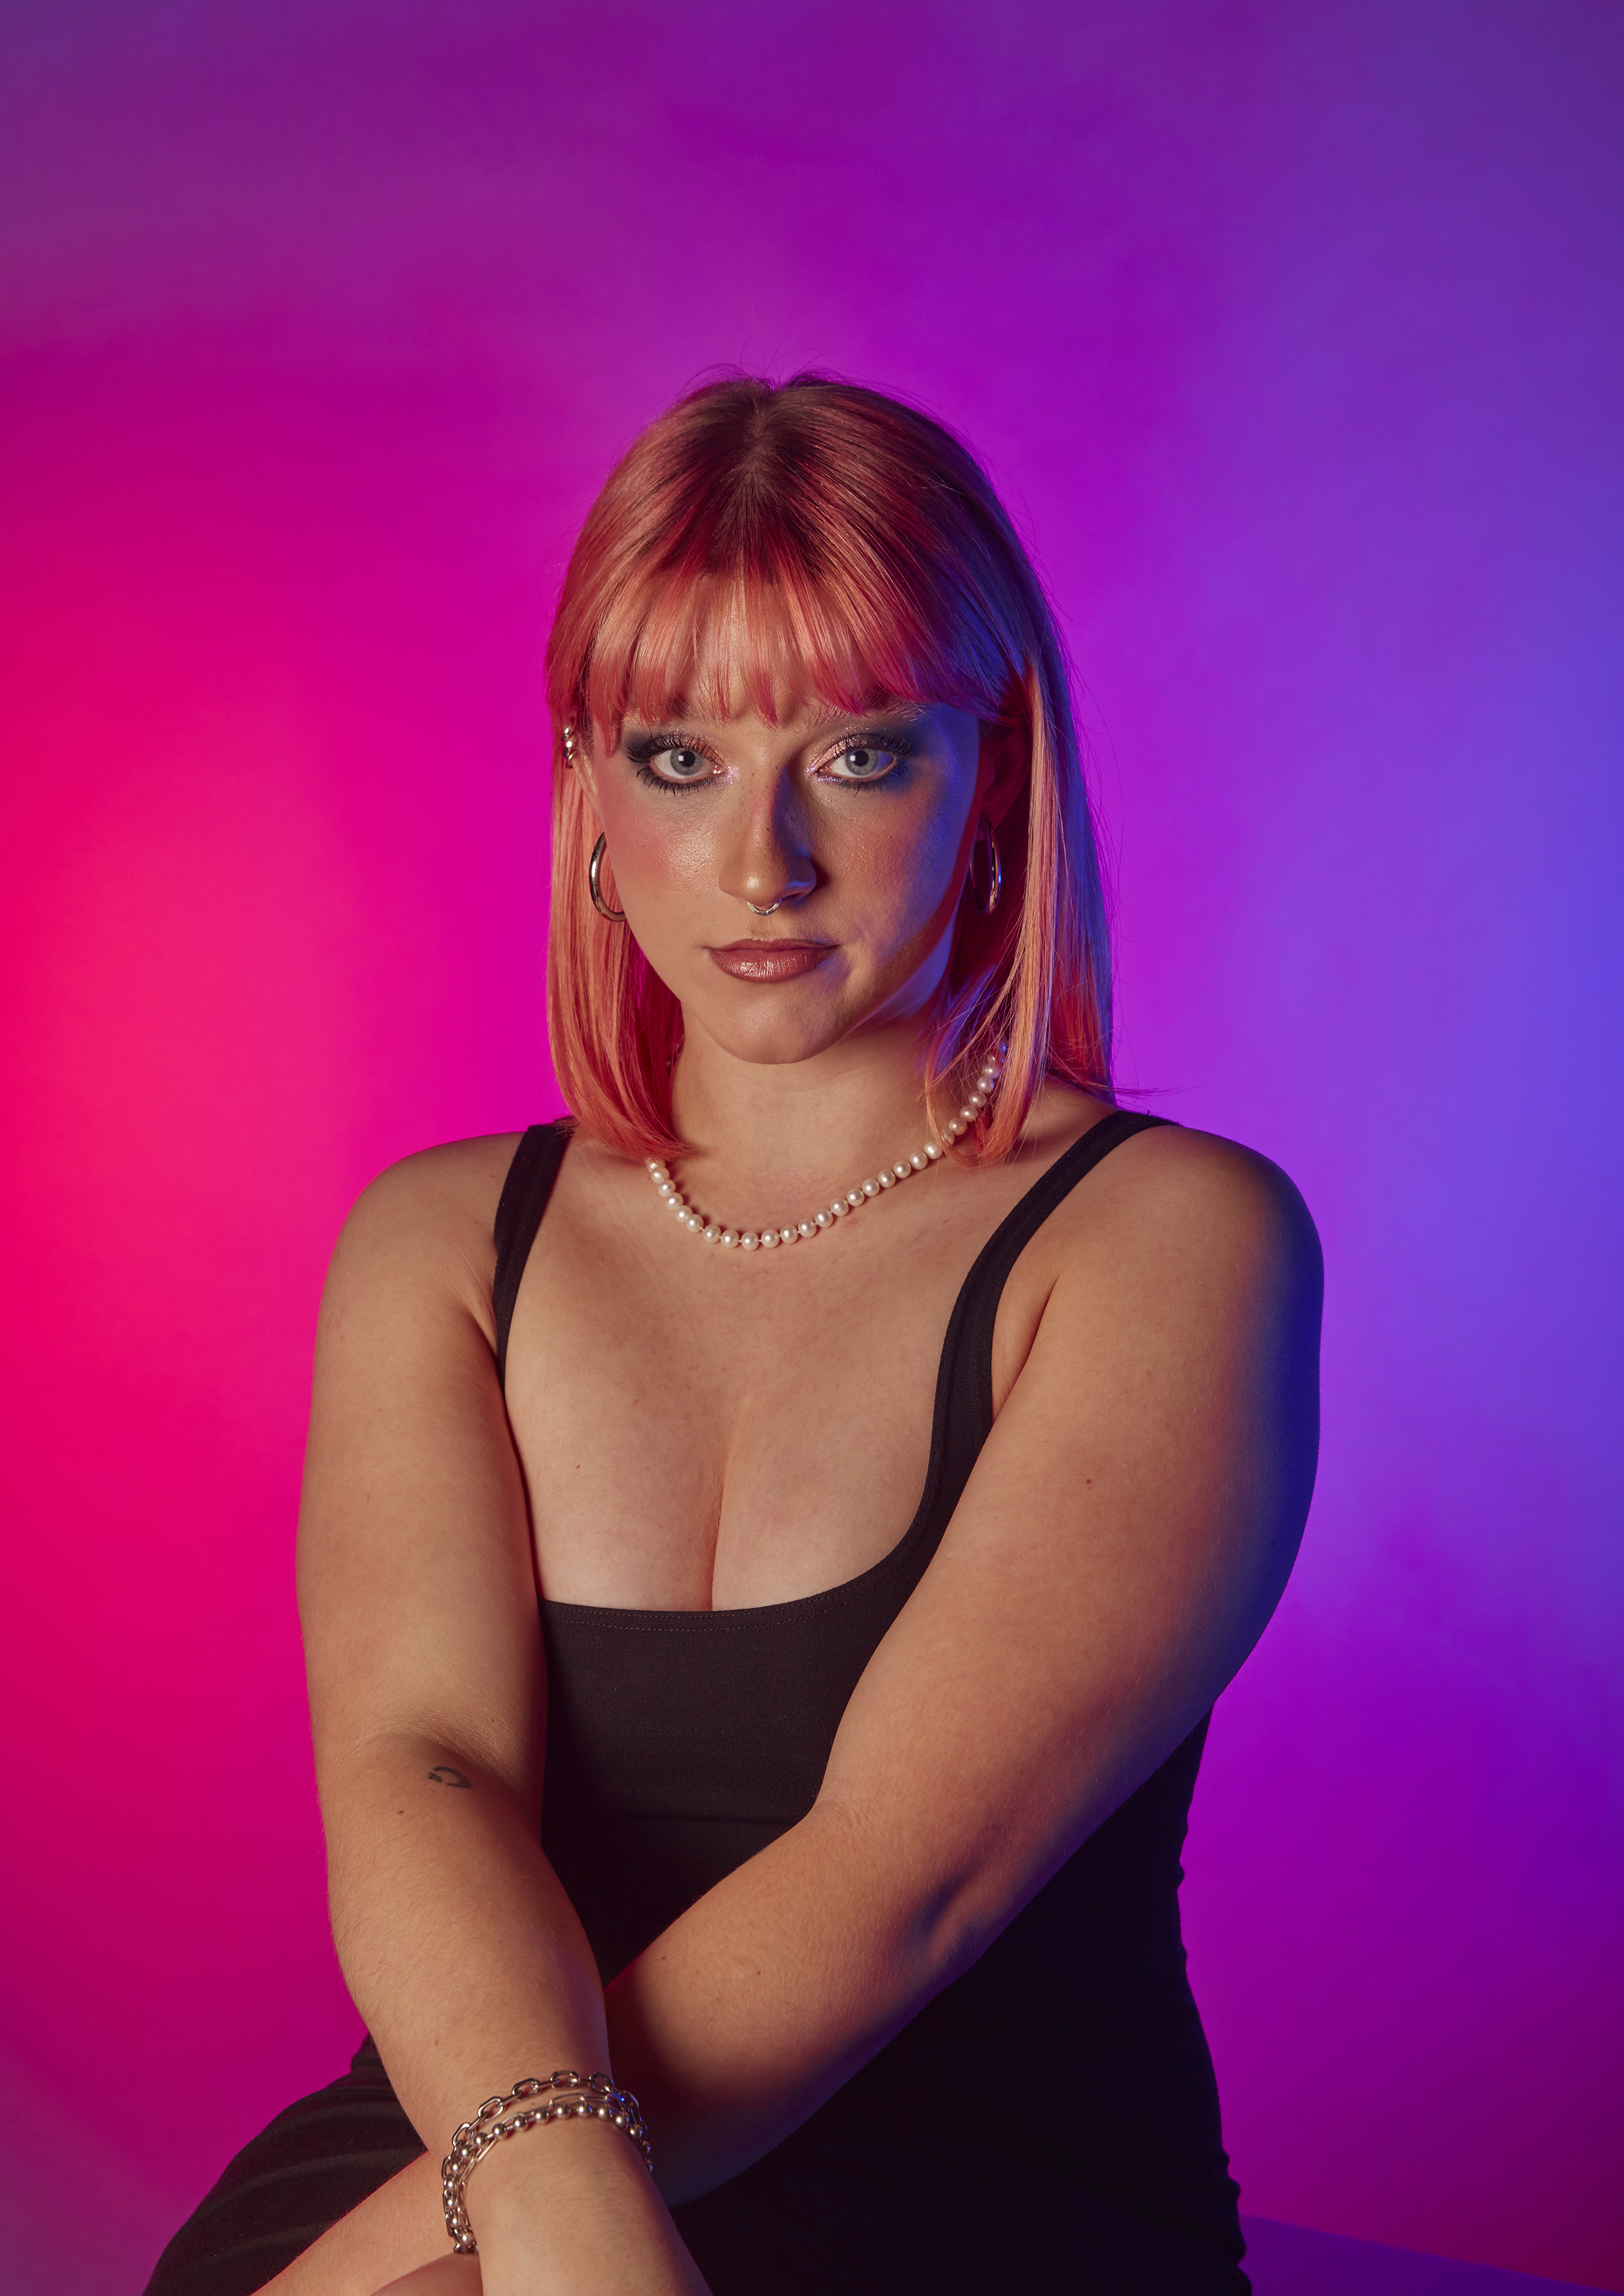 Portrait photo of model with pink hair and bangs, sitting with her arms folded in front of her. Image has a vibrant pink and purple gradient background